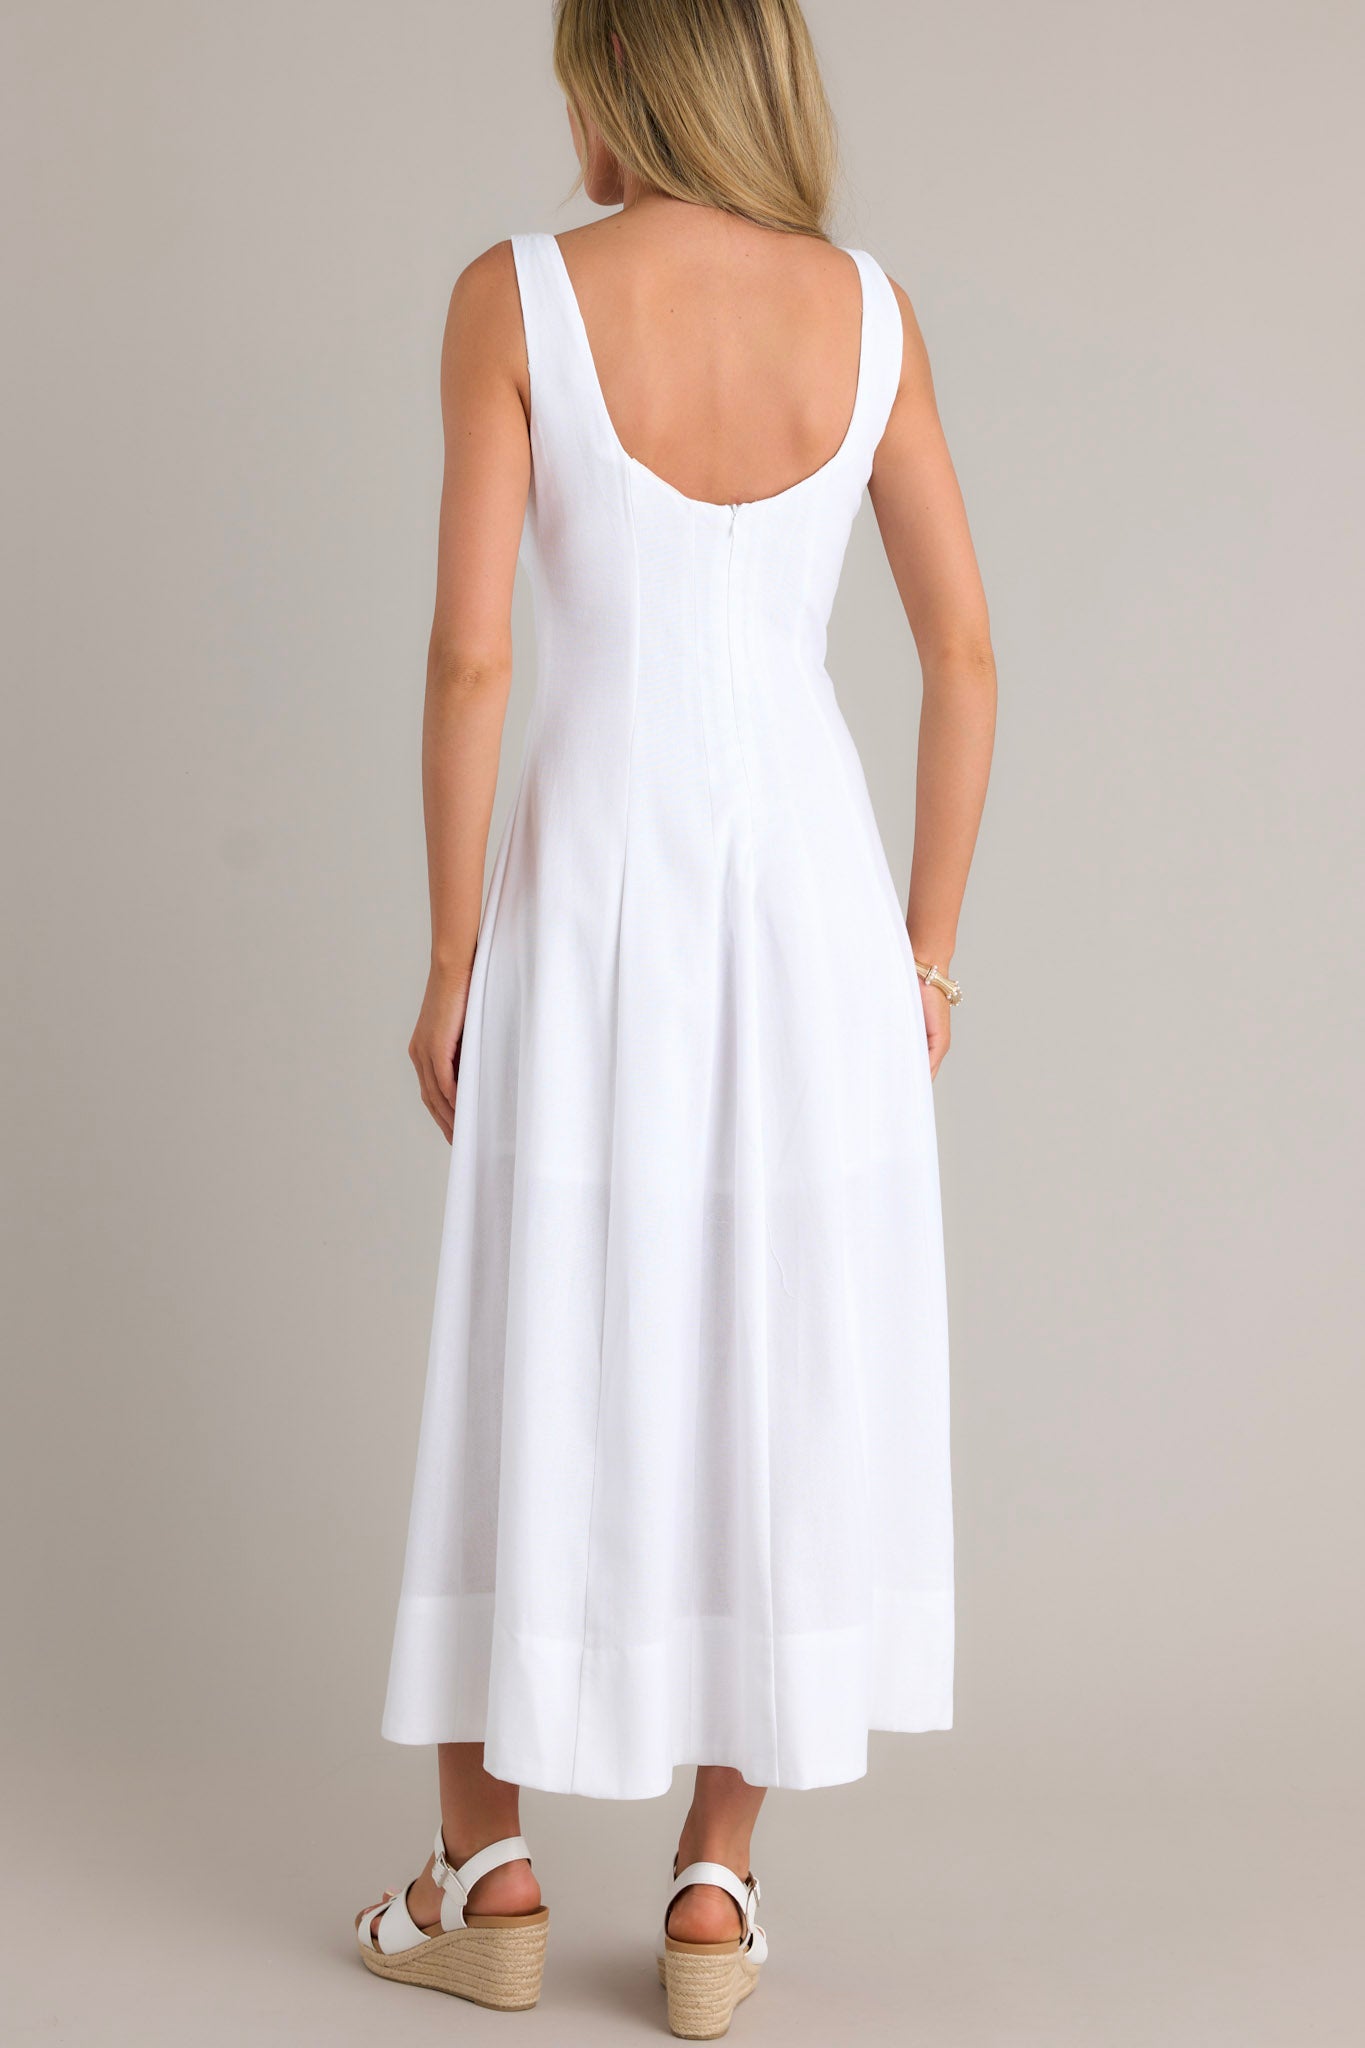 Back view of a white maxi dress highlighting the discrete back zipper, thick straps, and overall fit.